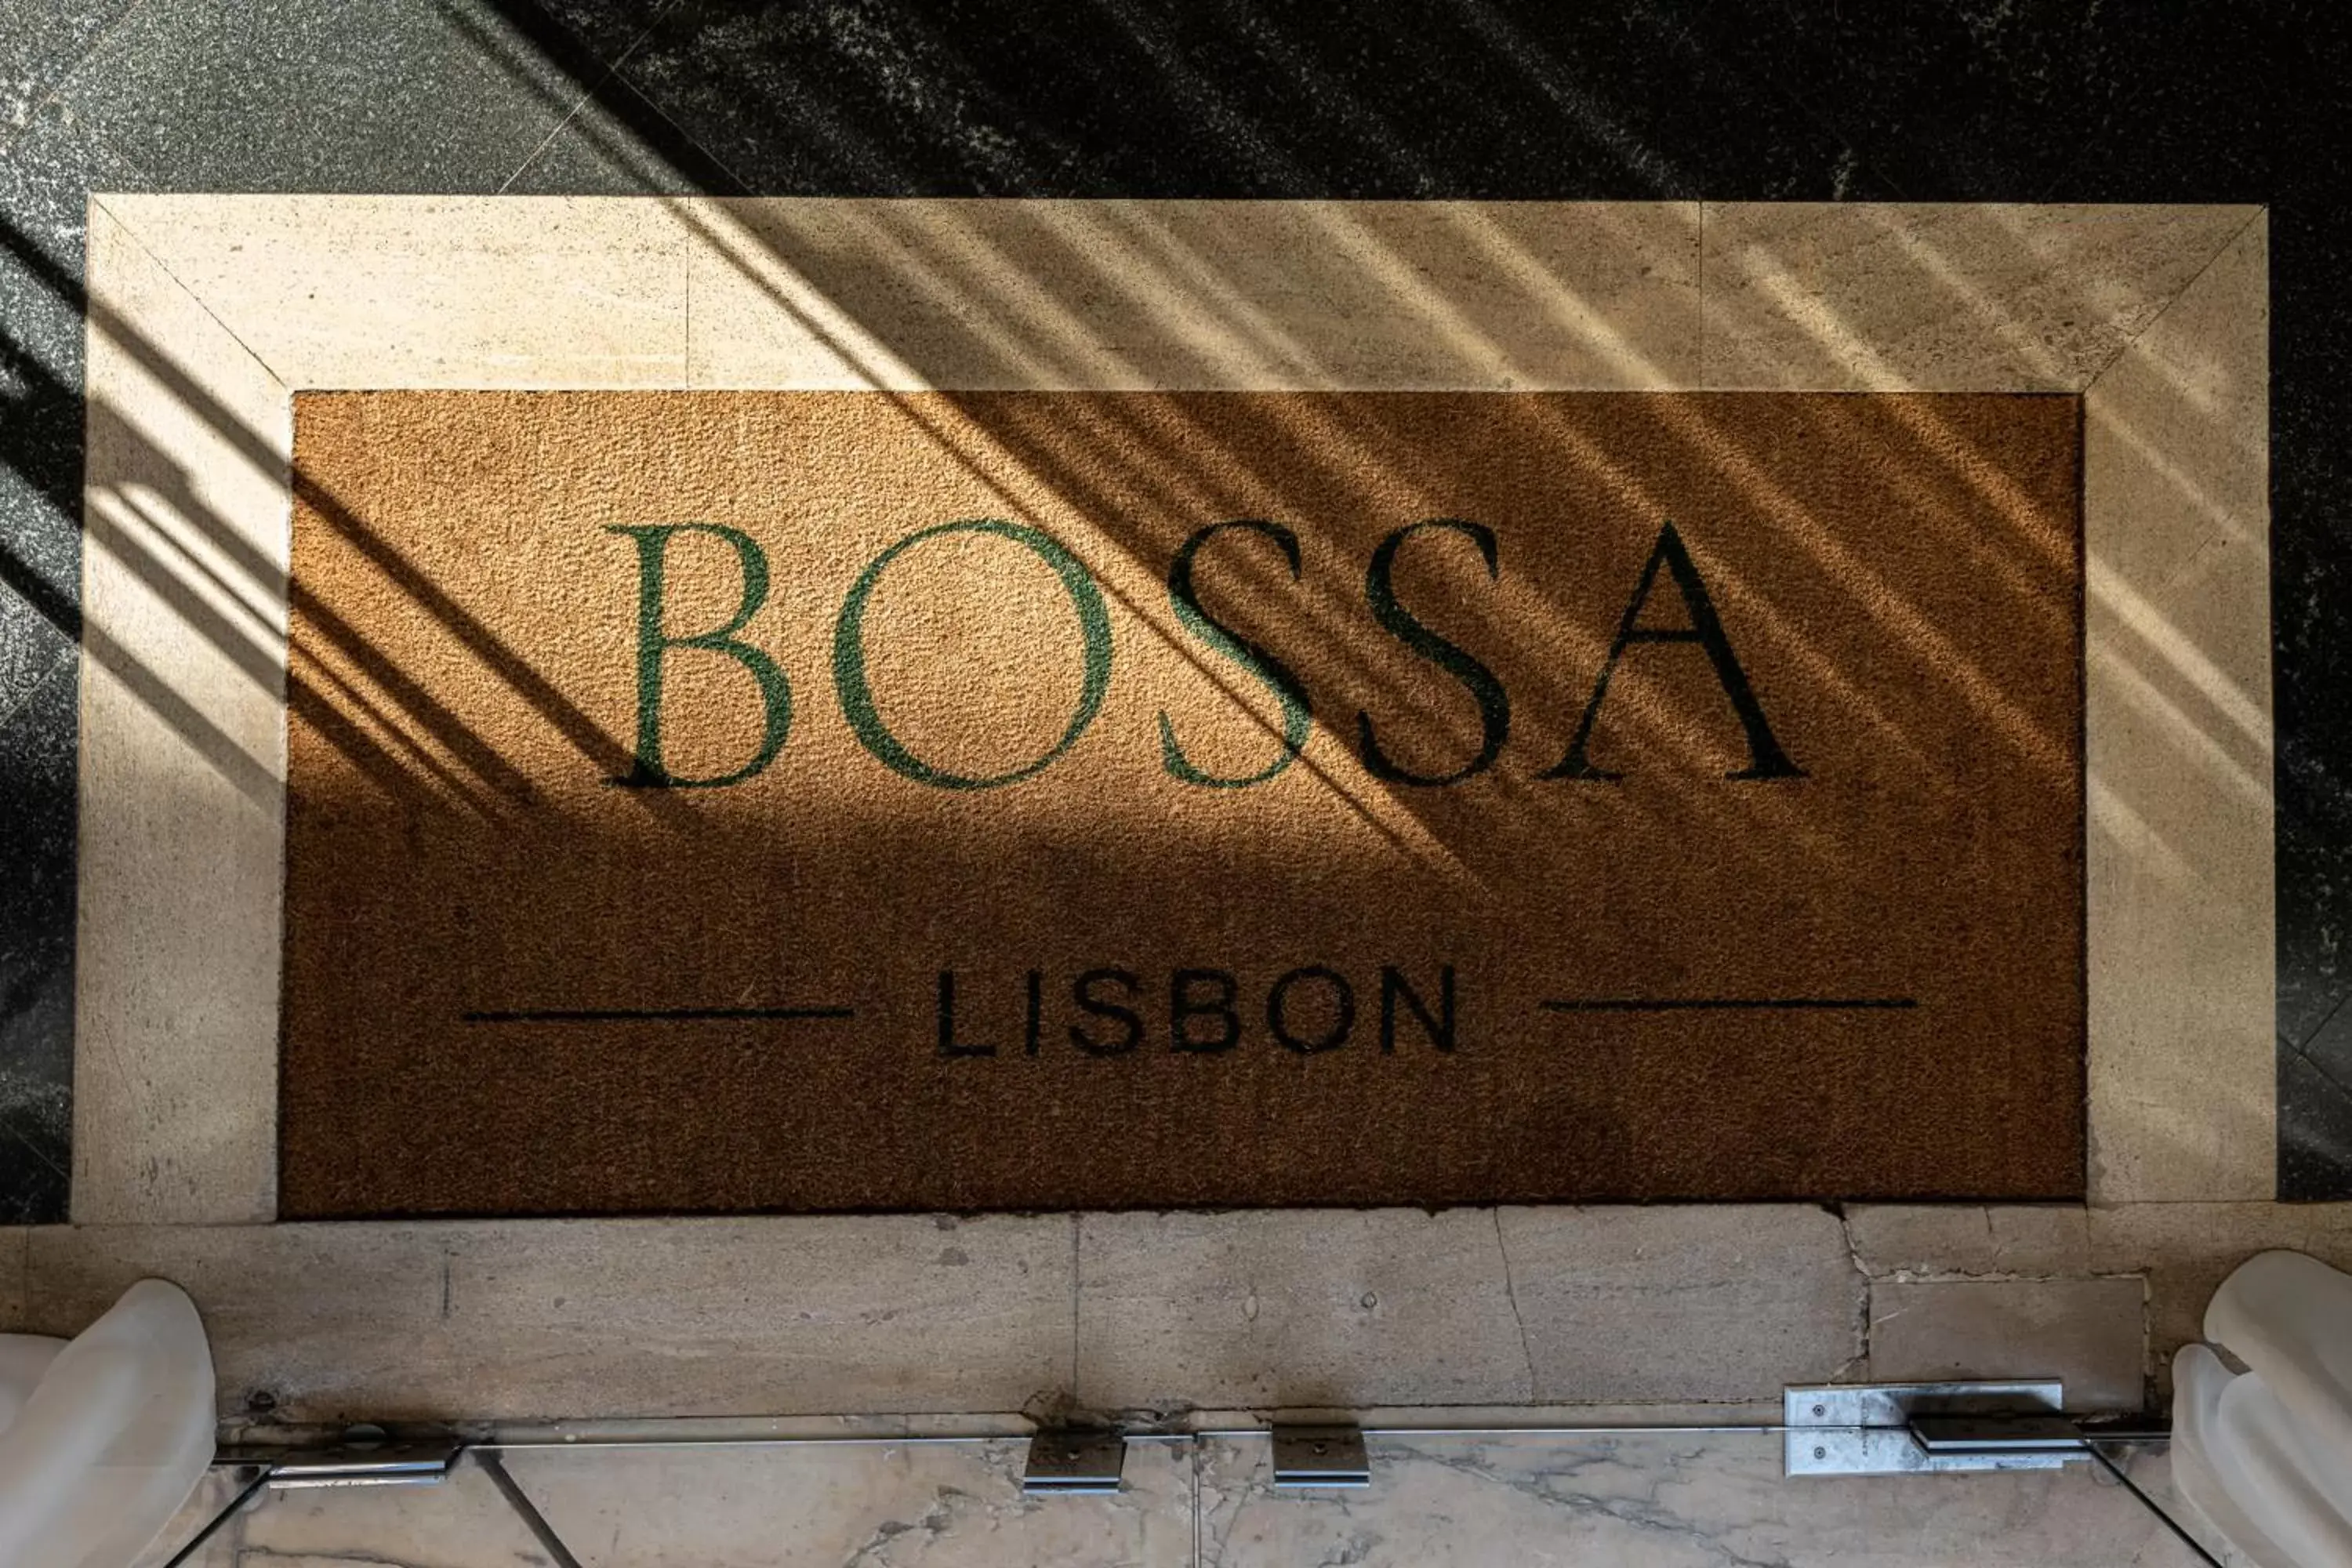 Property logo or sign in B&B Bossa Bed Lisbon